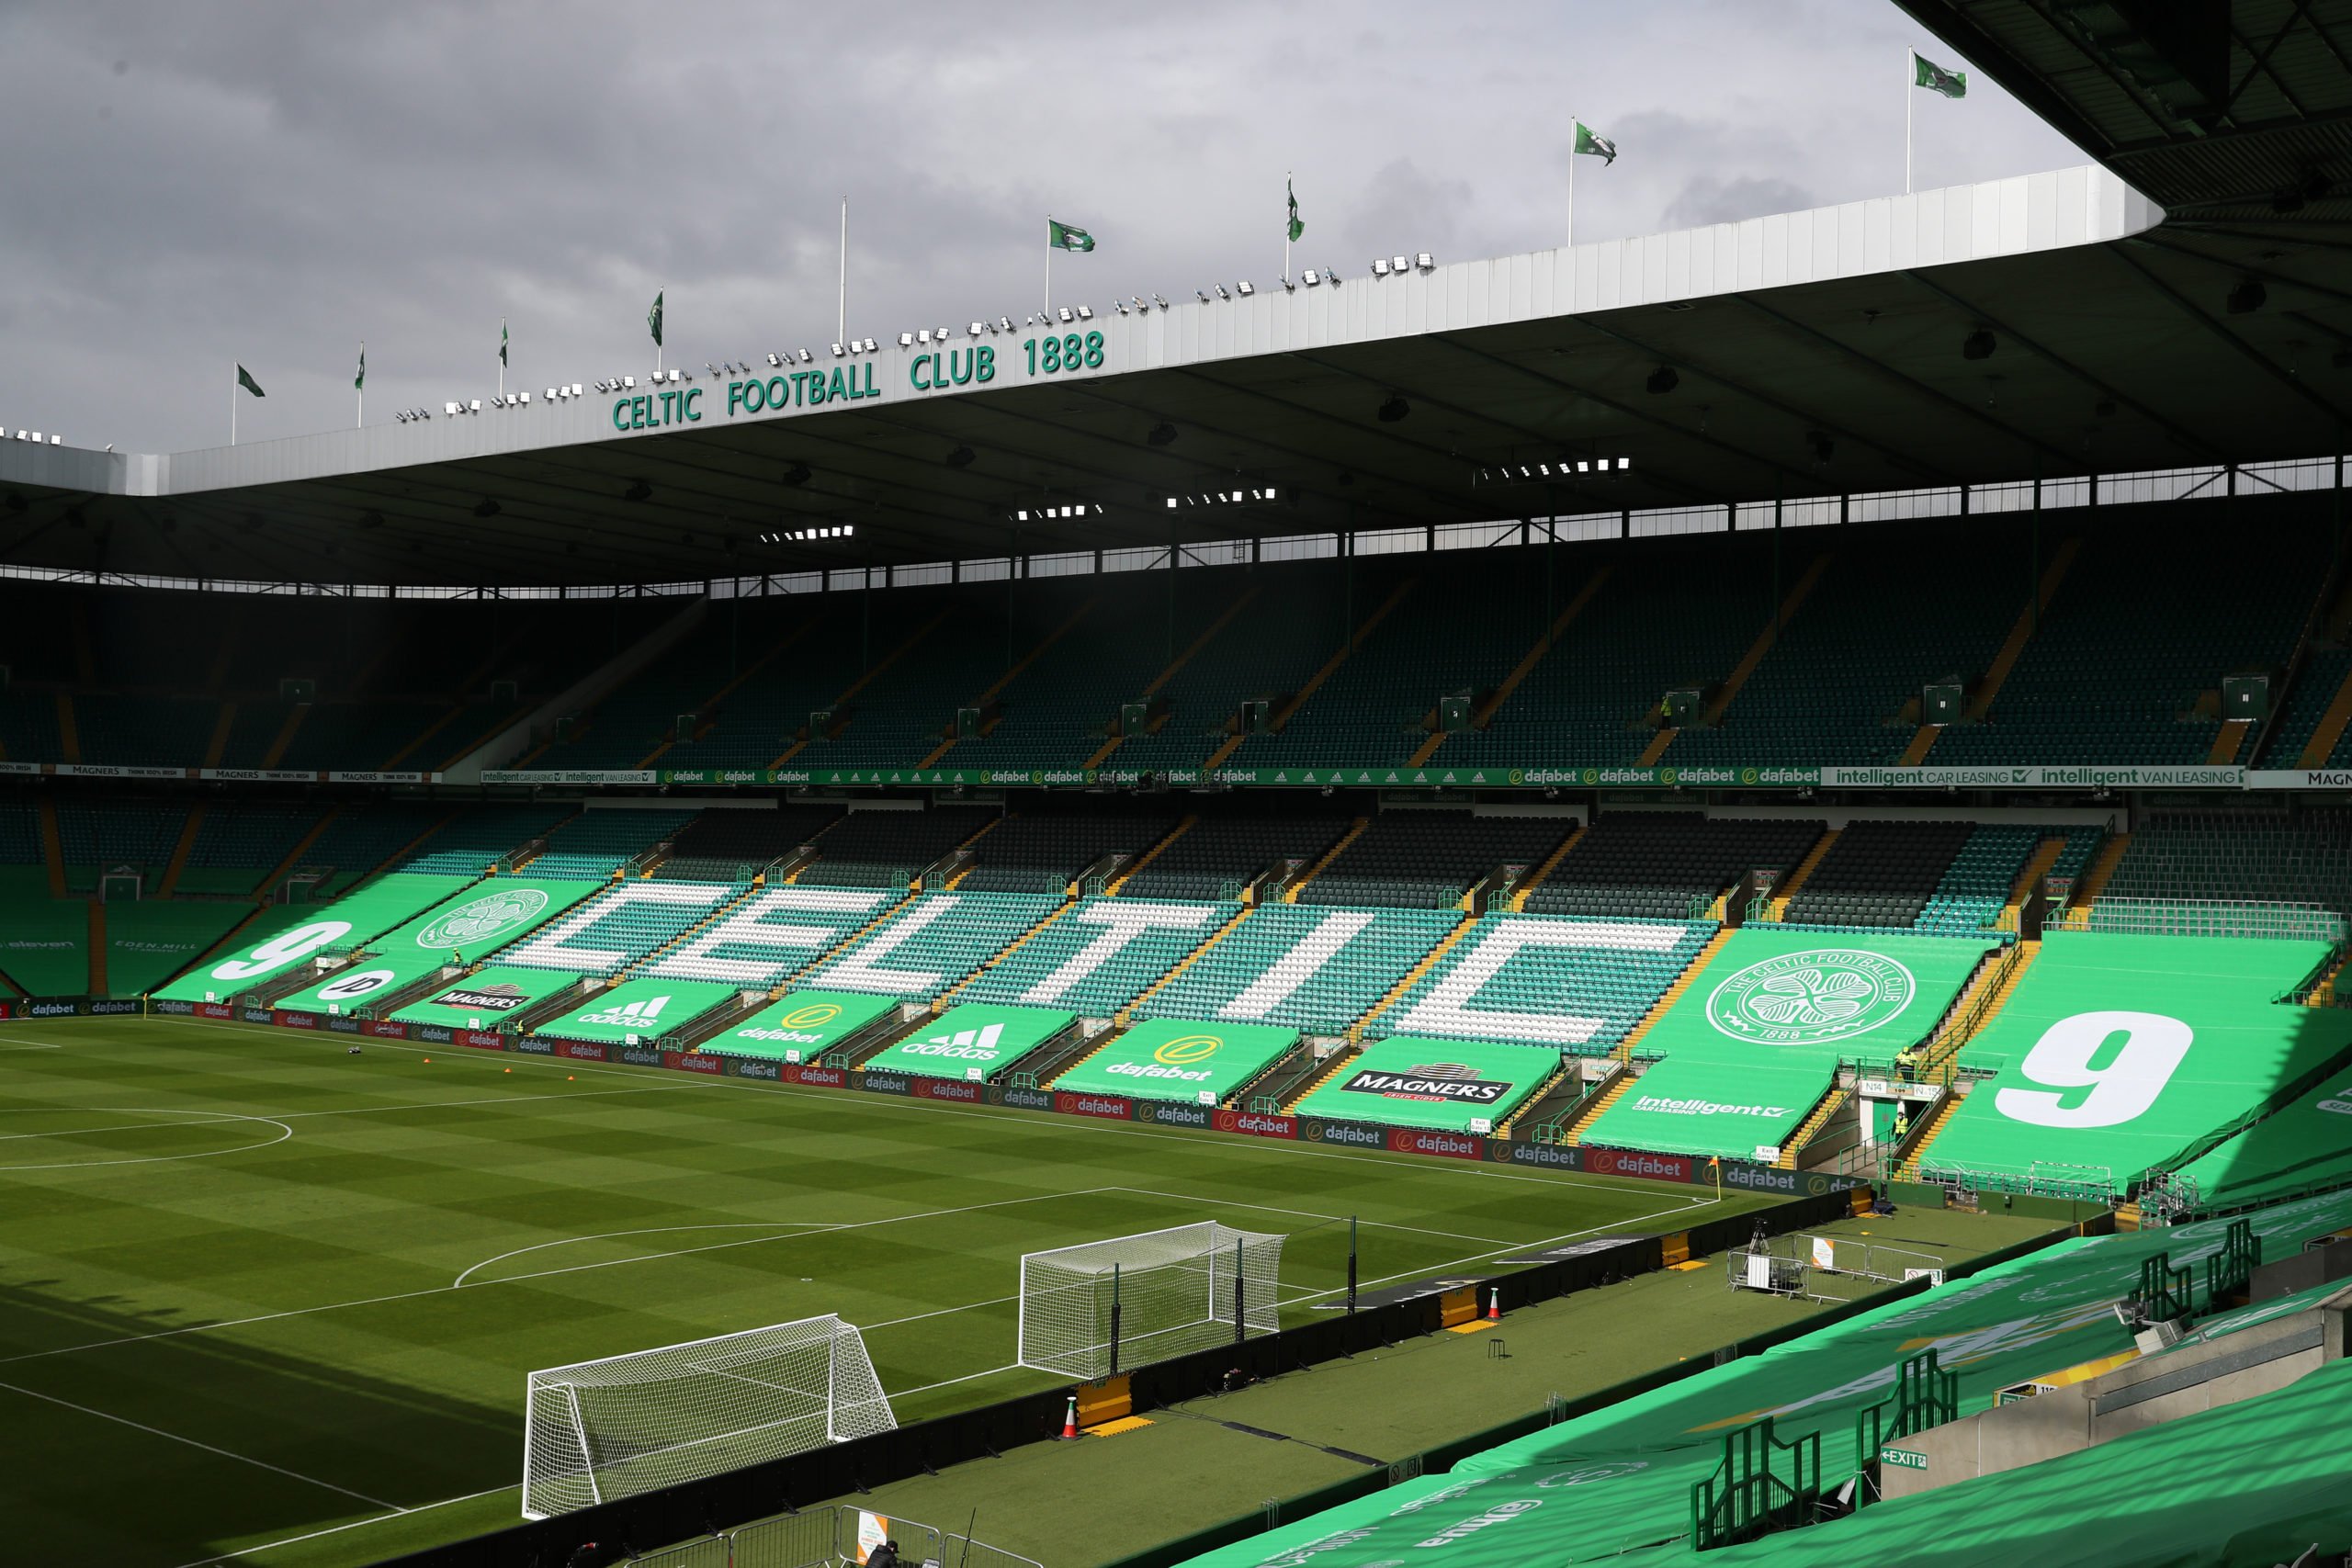 Celtic fans' petition on dropping Parks buses already gathering pace